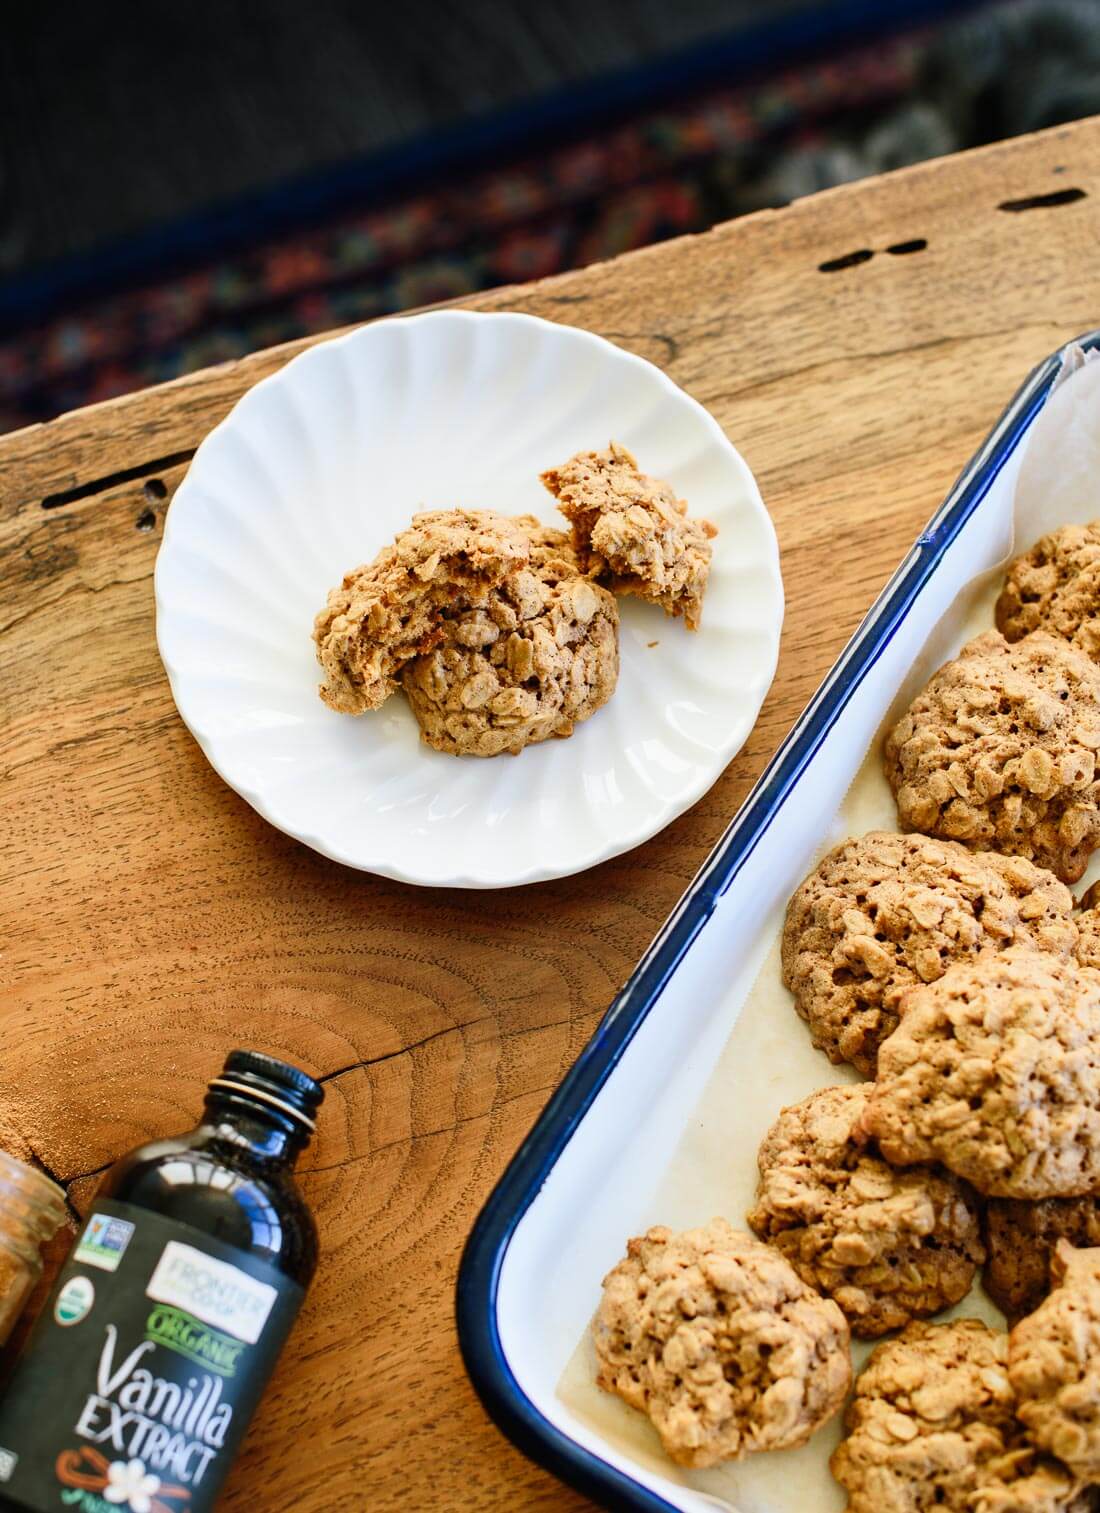 Spiced oatmeal cookies in time for the holidays! cookieandkate.com